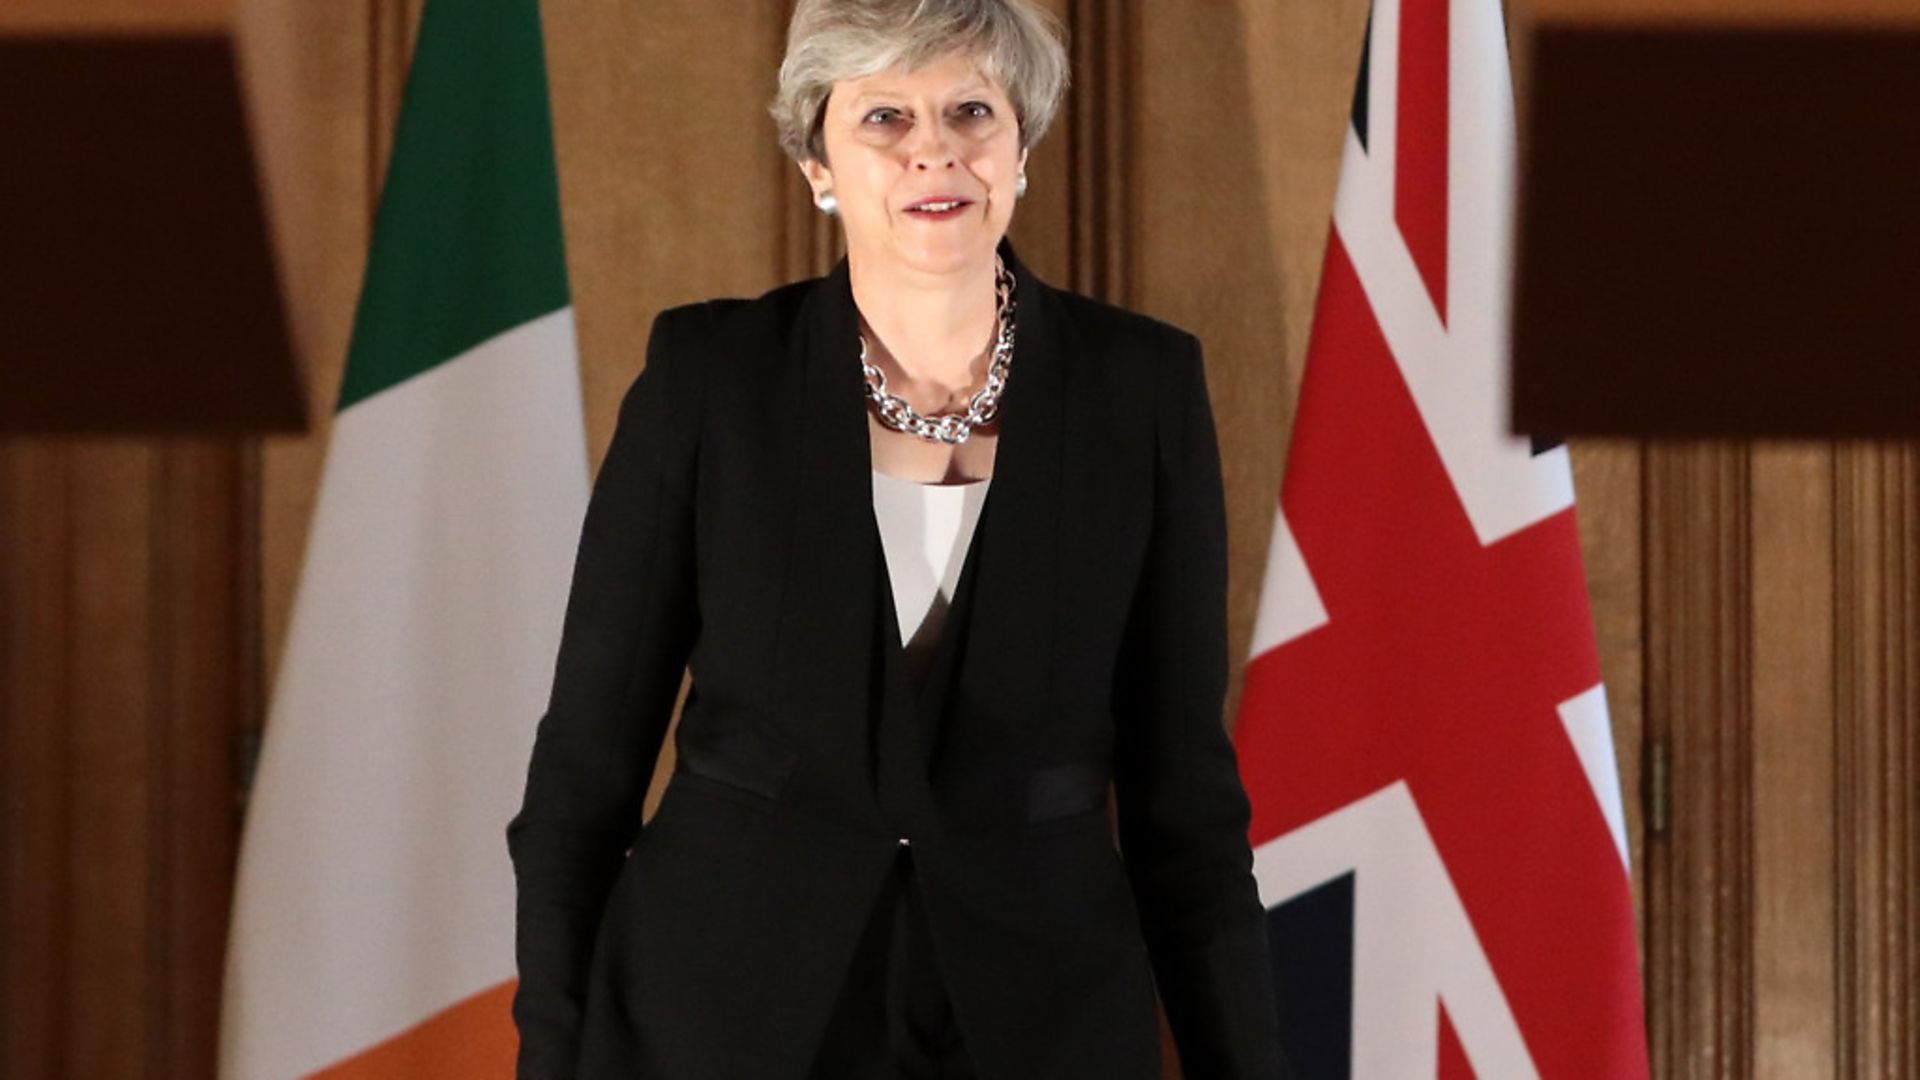 Theresa May has said there will be 'no return' to the Irish borders of the past. Photo: Simon Dawson/Bloomberg via Getty Images - Credit: Bloomberg via Getty Images